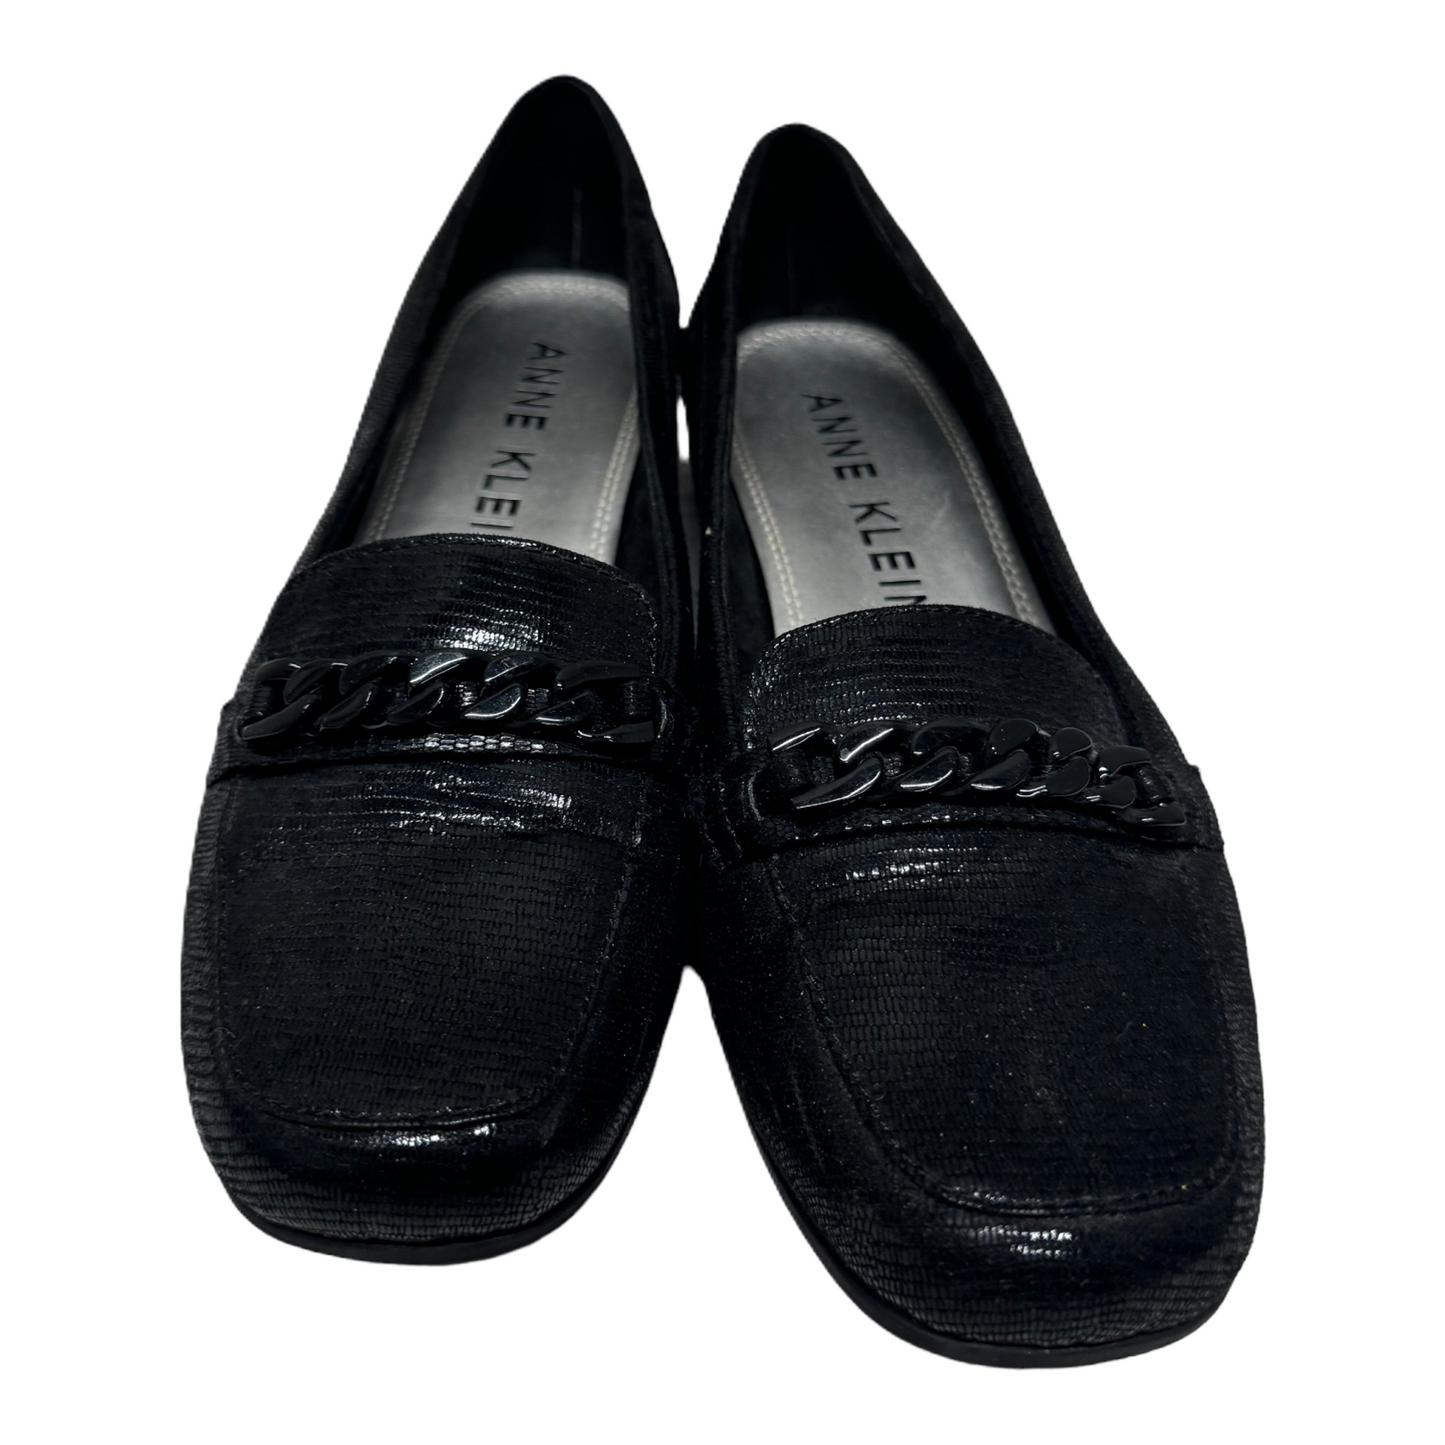 Black Shoes Flats By Anne Klein, Size: 10